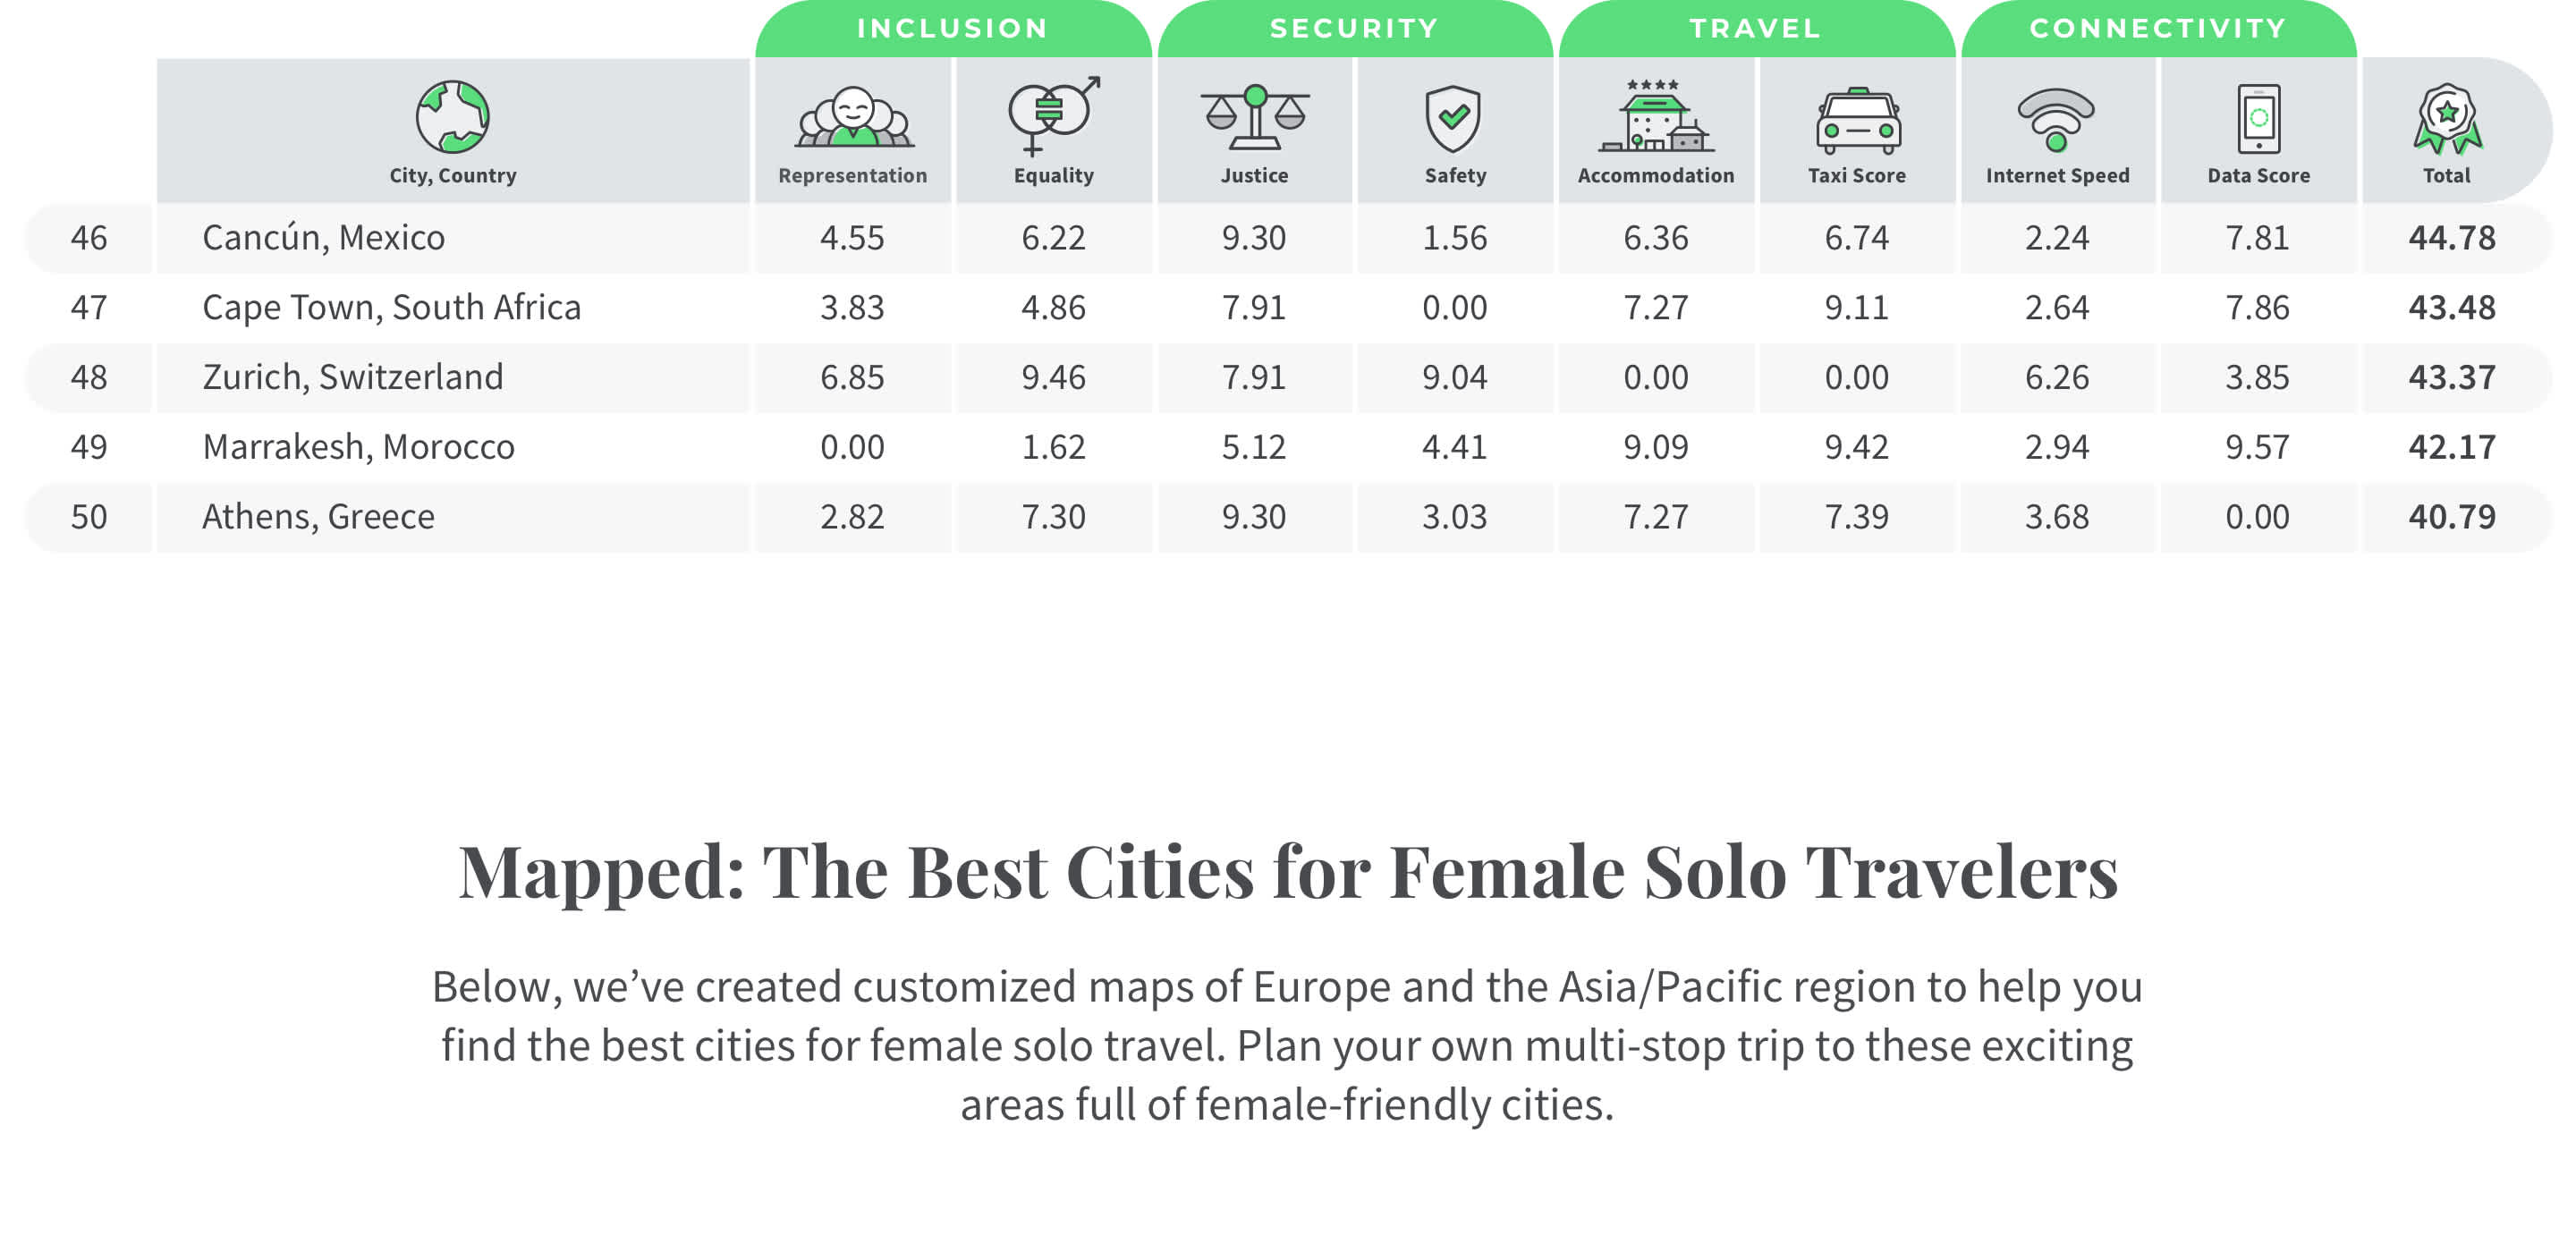 Table of the world's best cities for female solo travelers, position 46-50